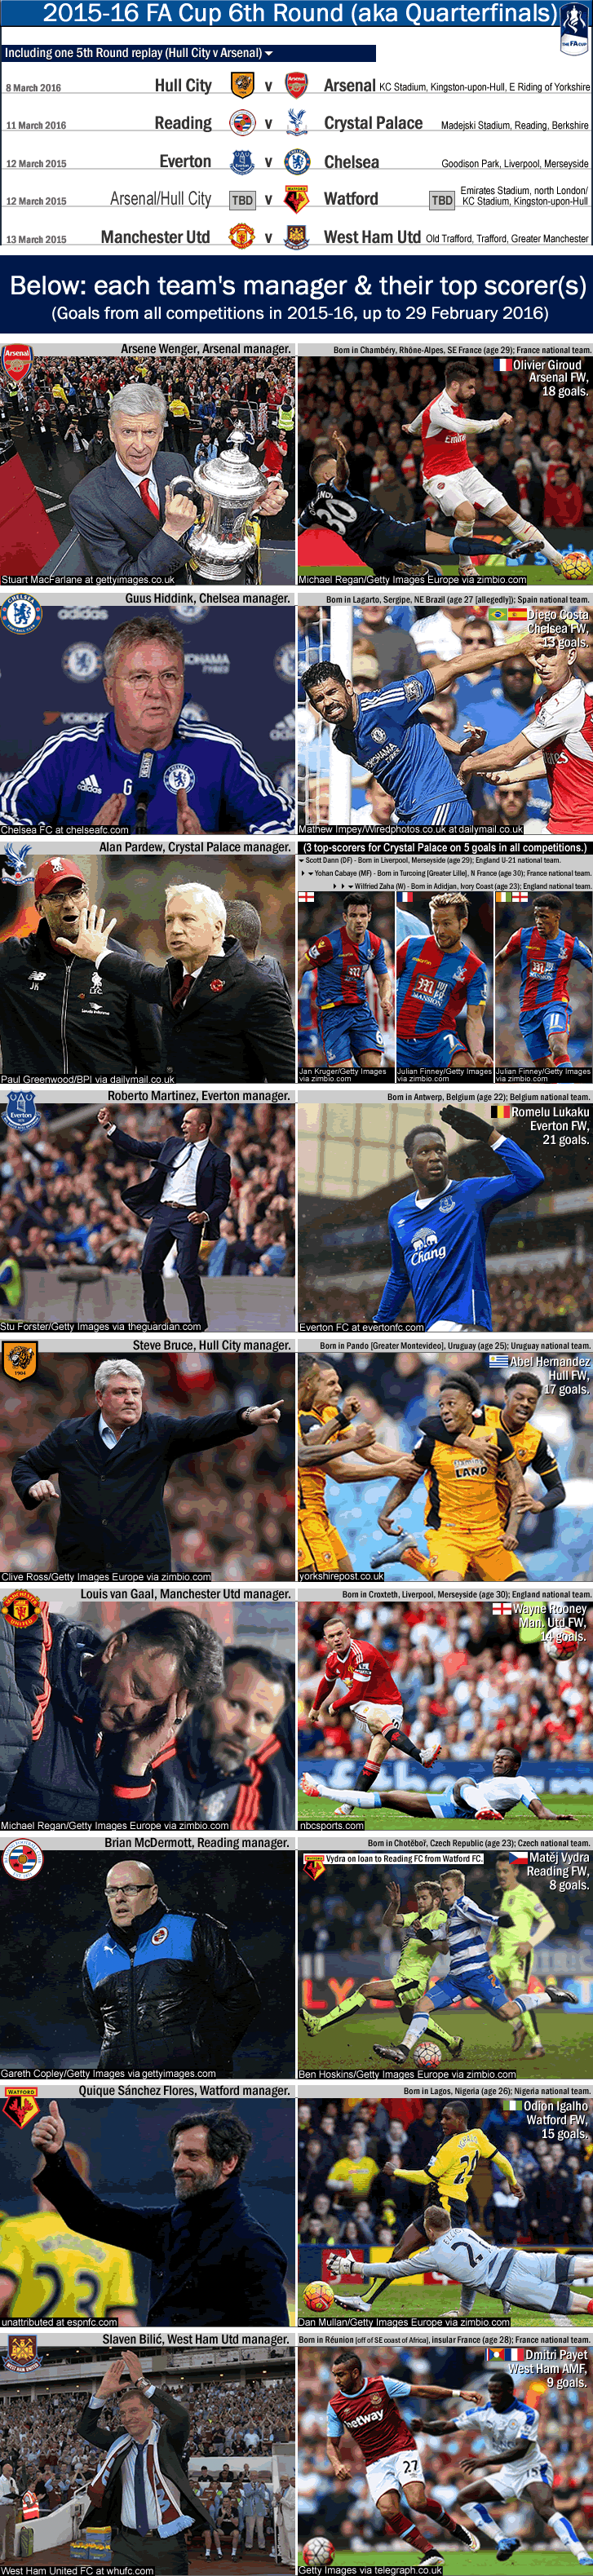 2015-16_fa-cup_6th-round_9-teams_managers-and-top-scorers_arsenal_chelsea_crystal-palace_everton_hull-city_manchester-utd_reading_watford_west-ham-utd_i_.gif